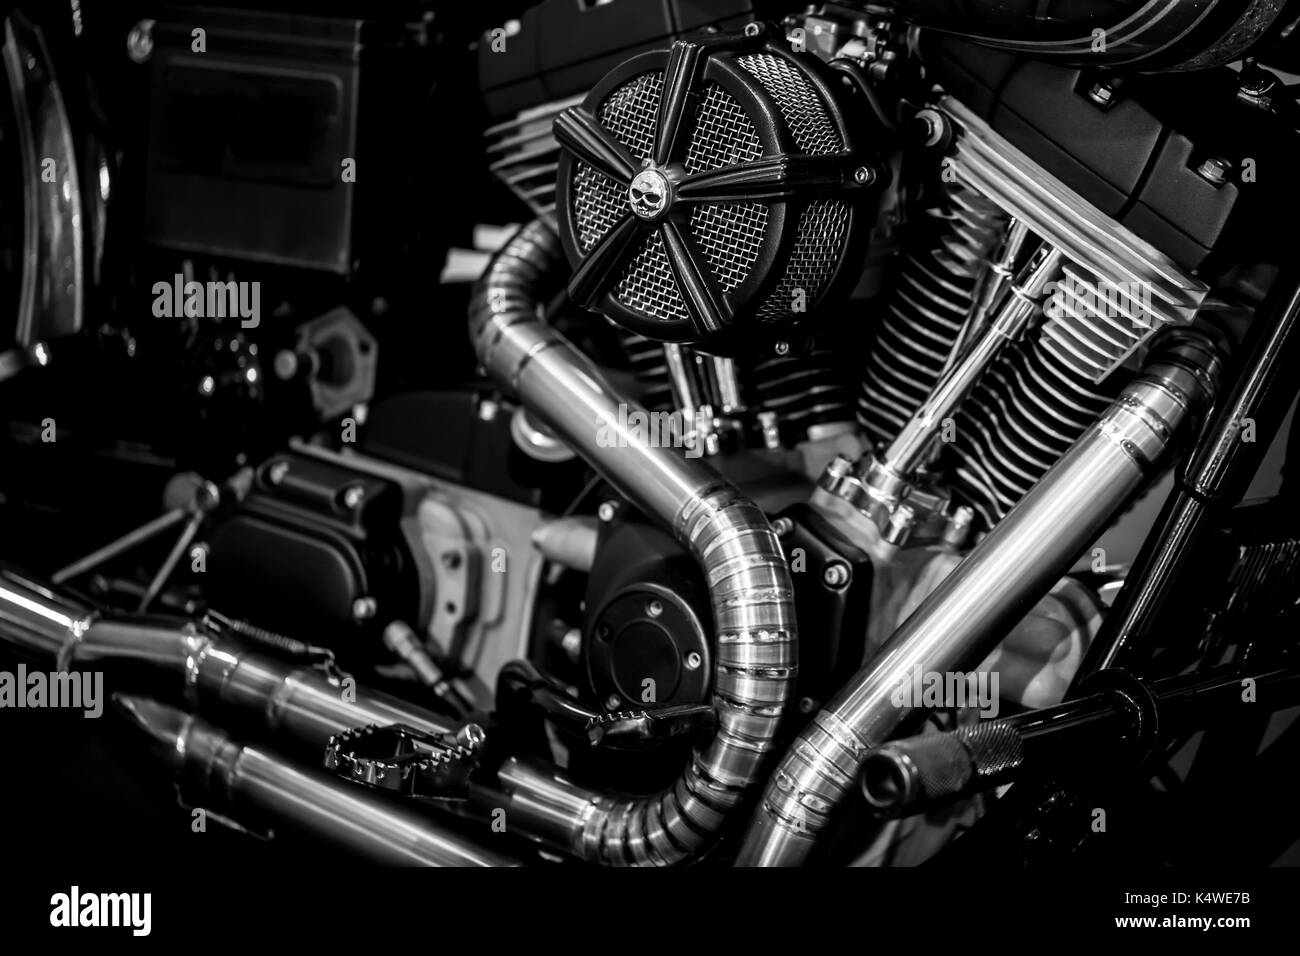 Motorcycle engine engine exhaust pipes art photography in black and white Stock Photo